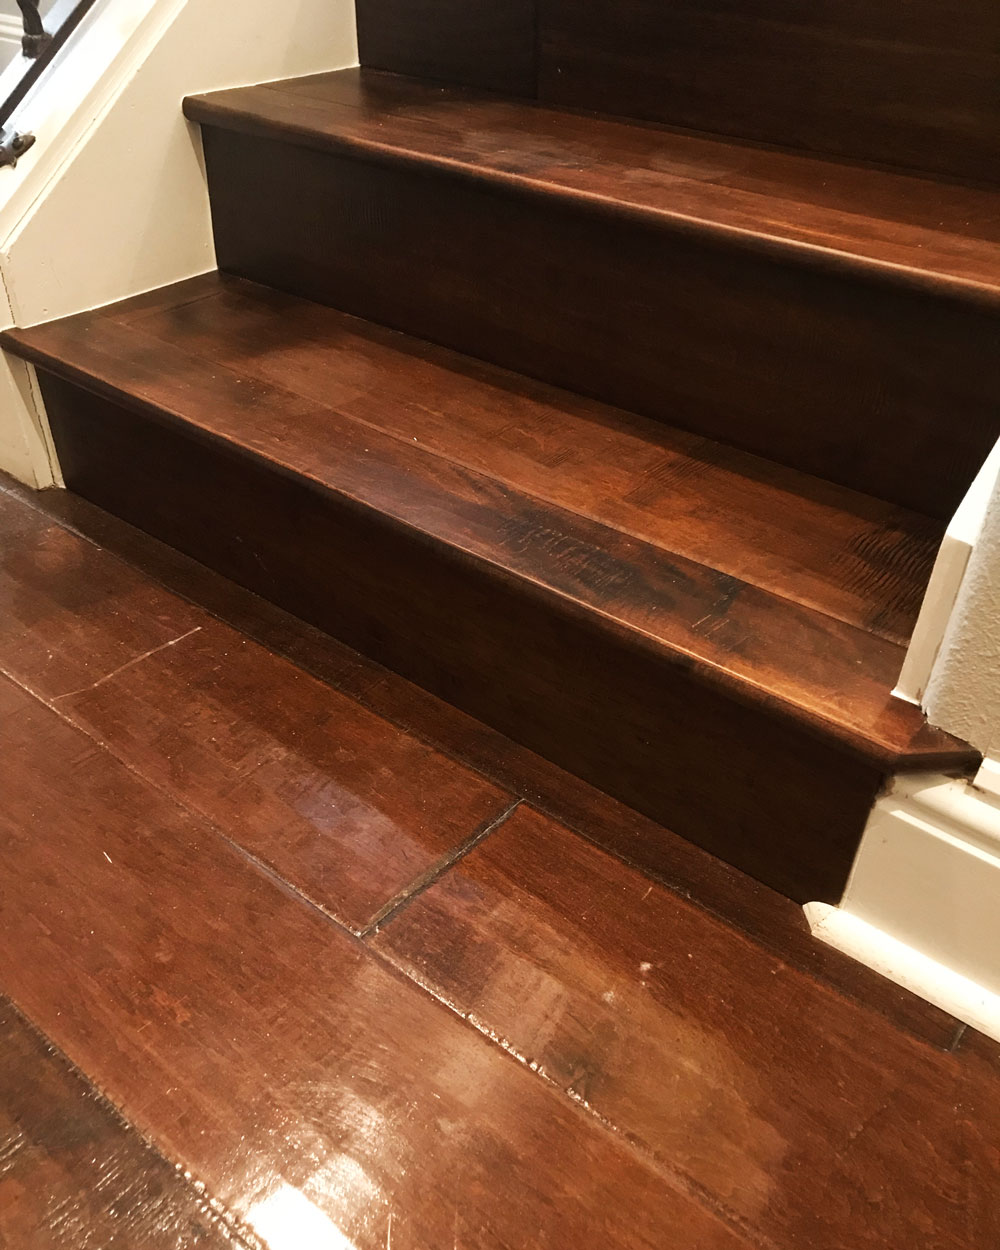 Staircase steps with mahogany hardwood floors